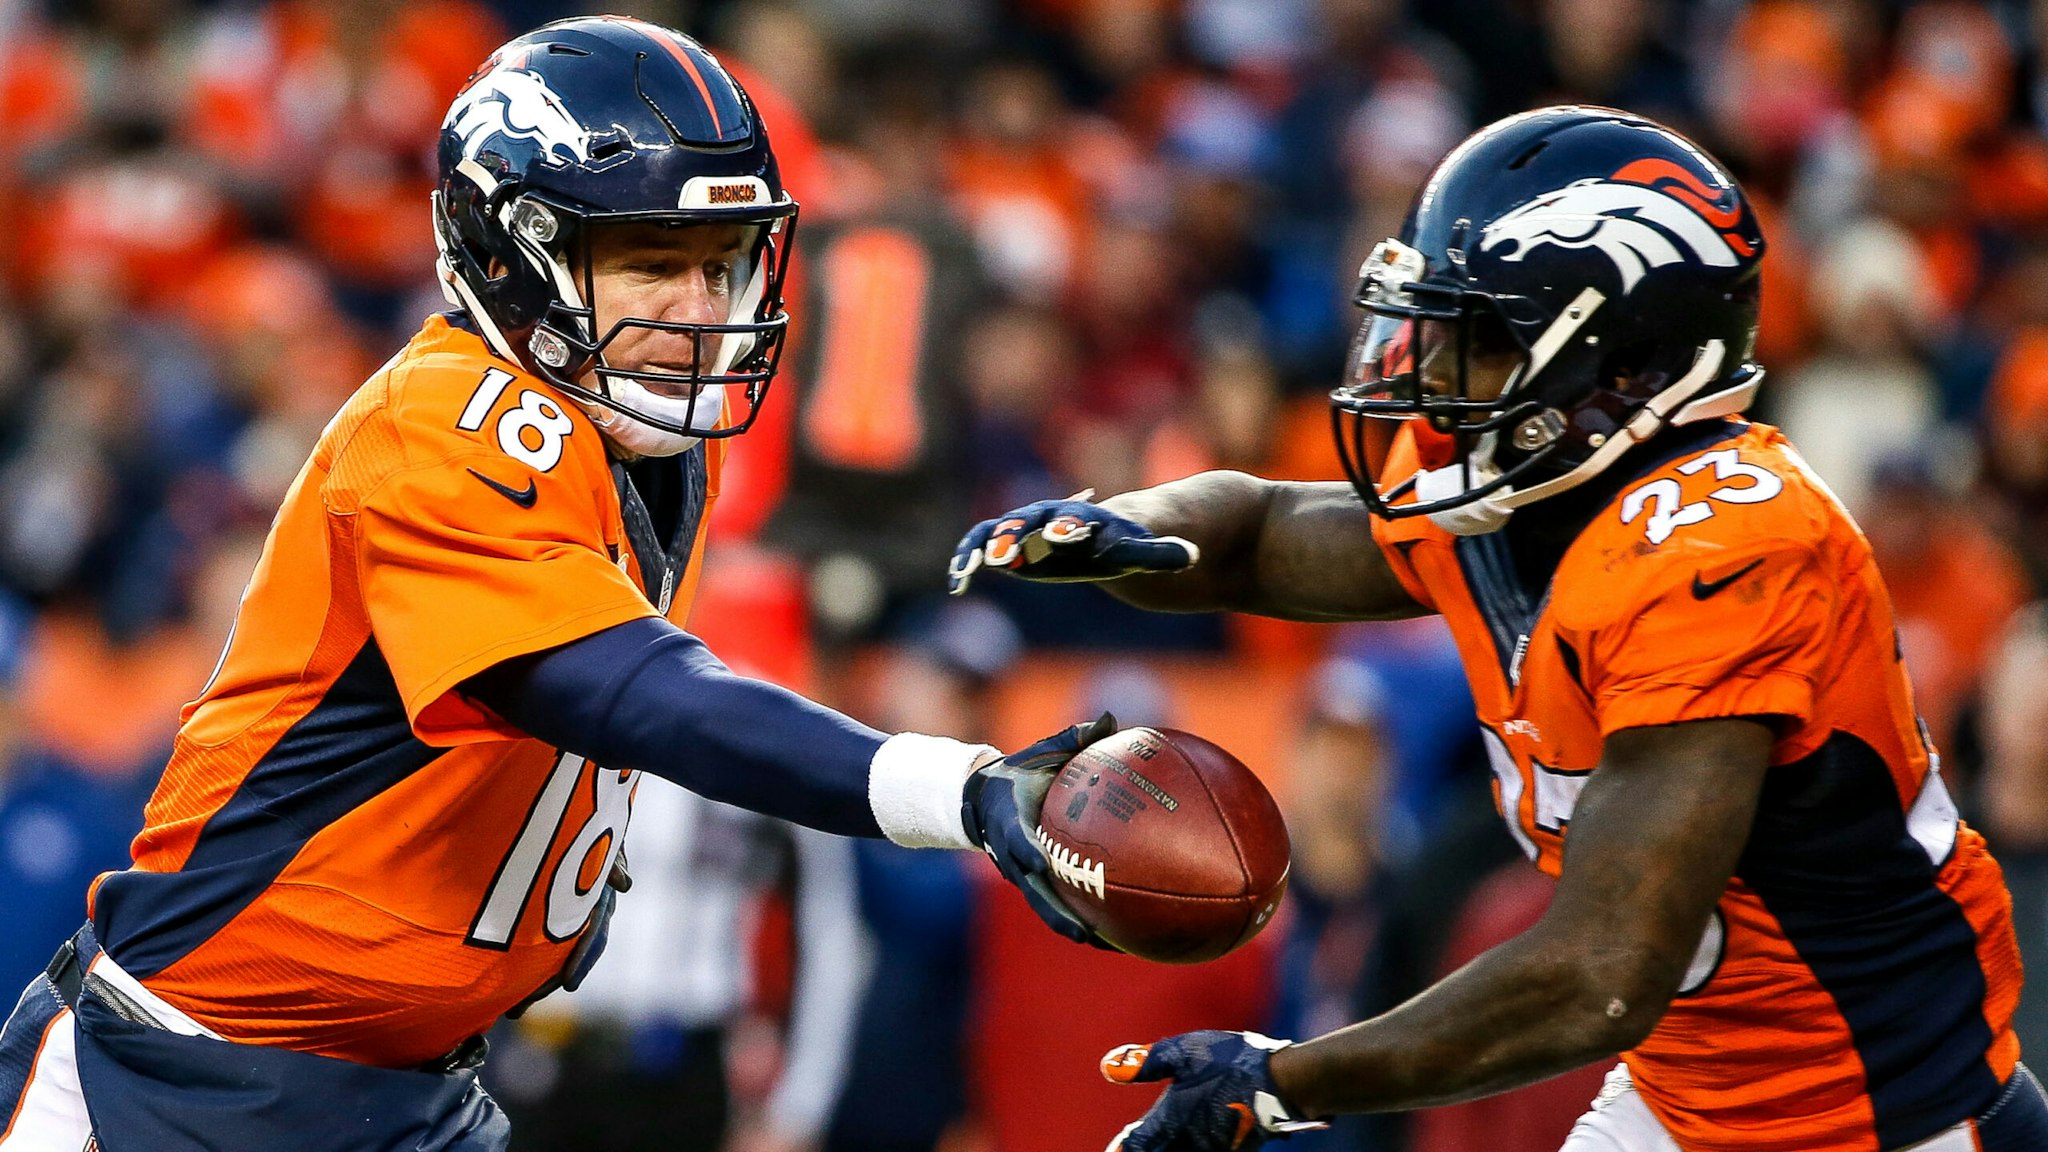 DENVER, CO - JANUARY 3: Quarterback Peyton Manning #18 of the Denver Broncos, who entered the game after Brock Osweiler #17 sustained an injury, hands off to running back Ronnie Hillman #23 at Sports Authority Field at Mile High on January 3, 2016 in Denver, Colorado.